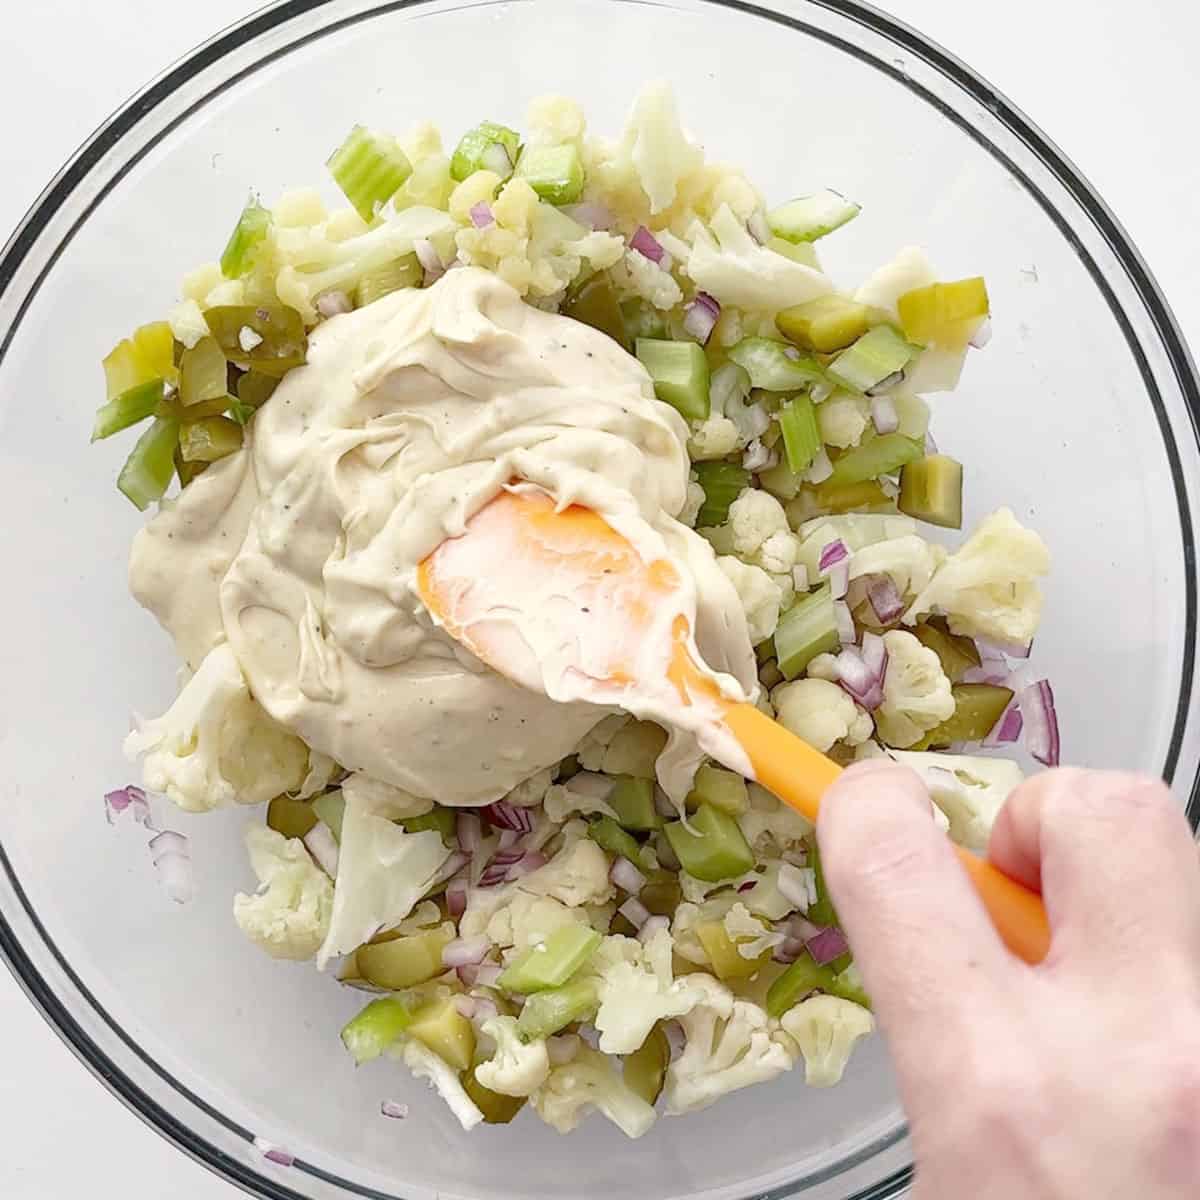 Adding the dressing to the salad.